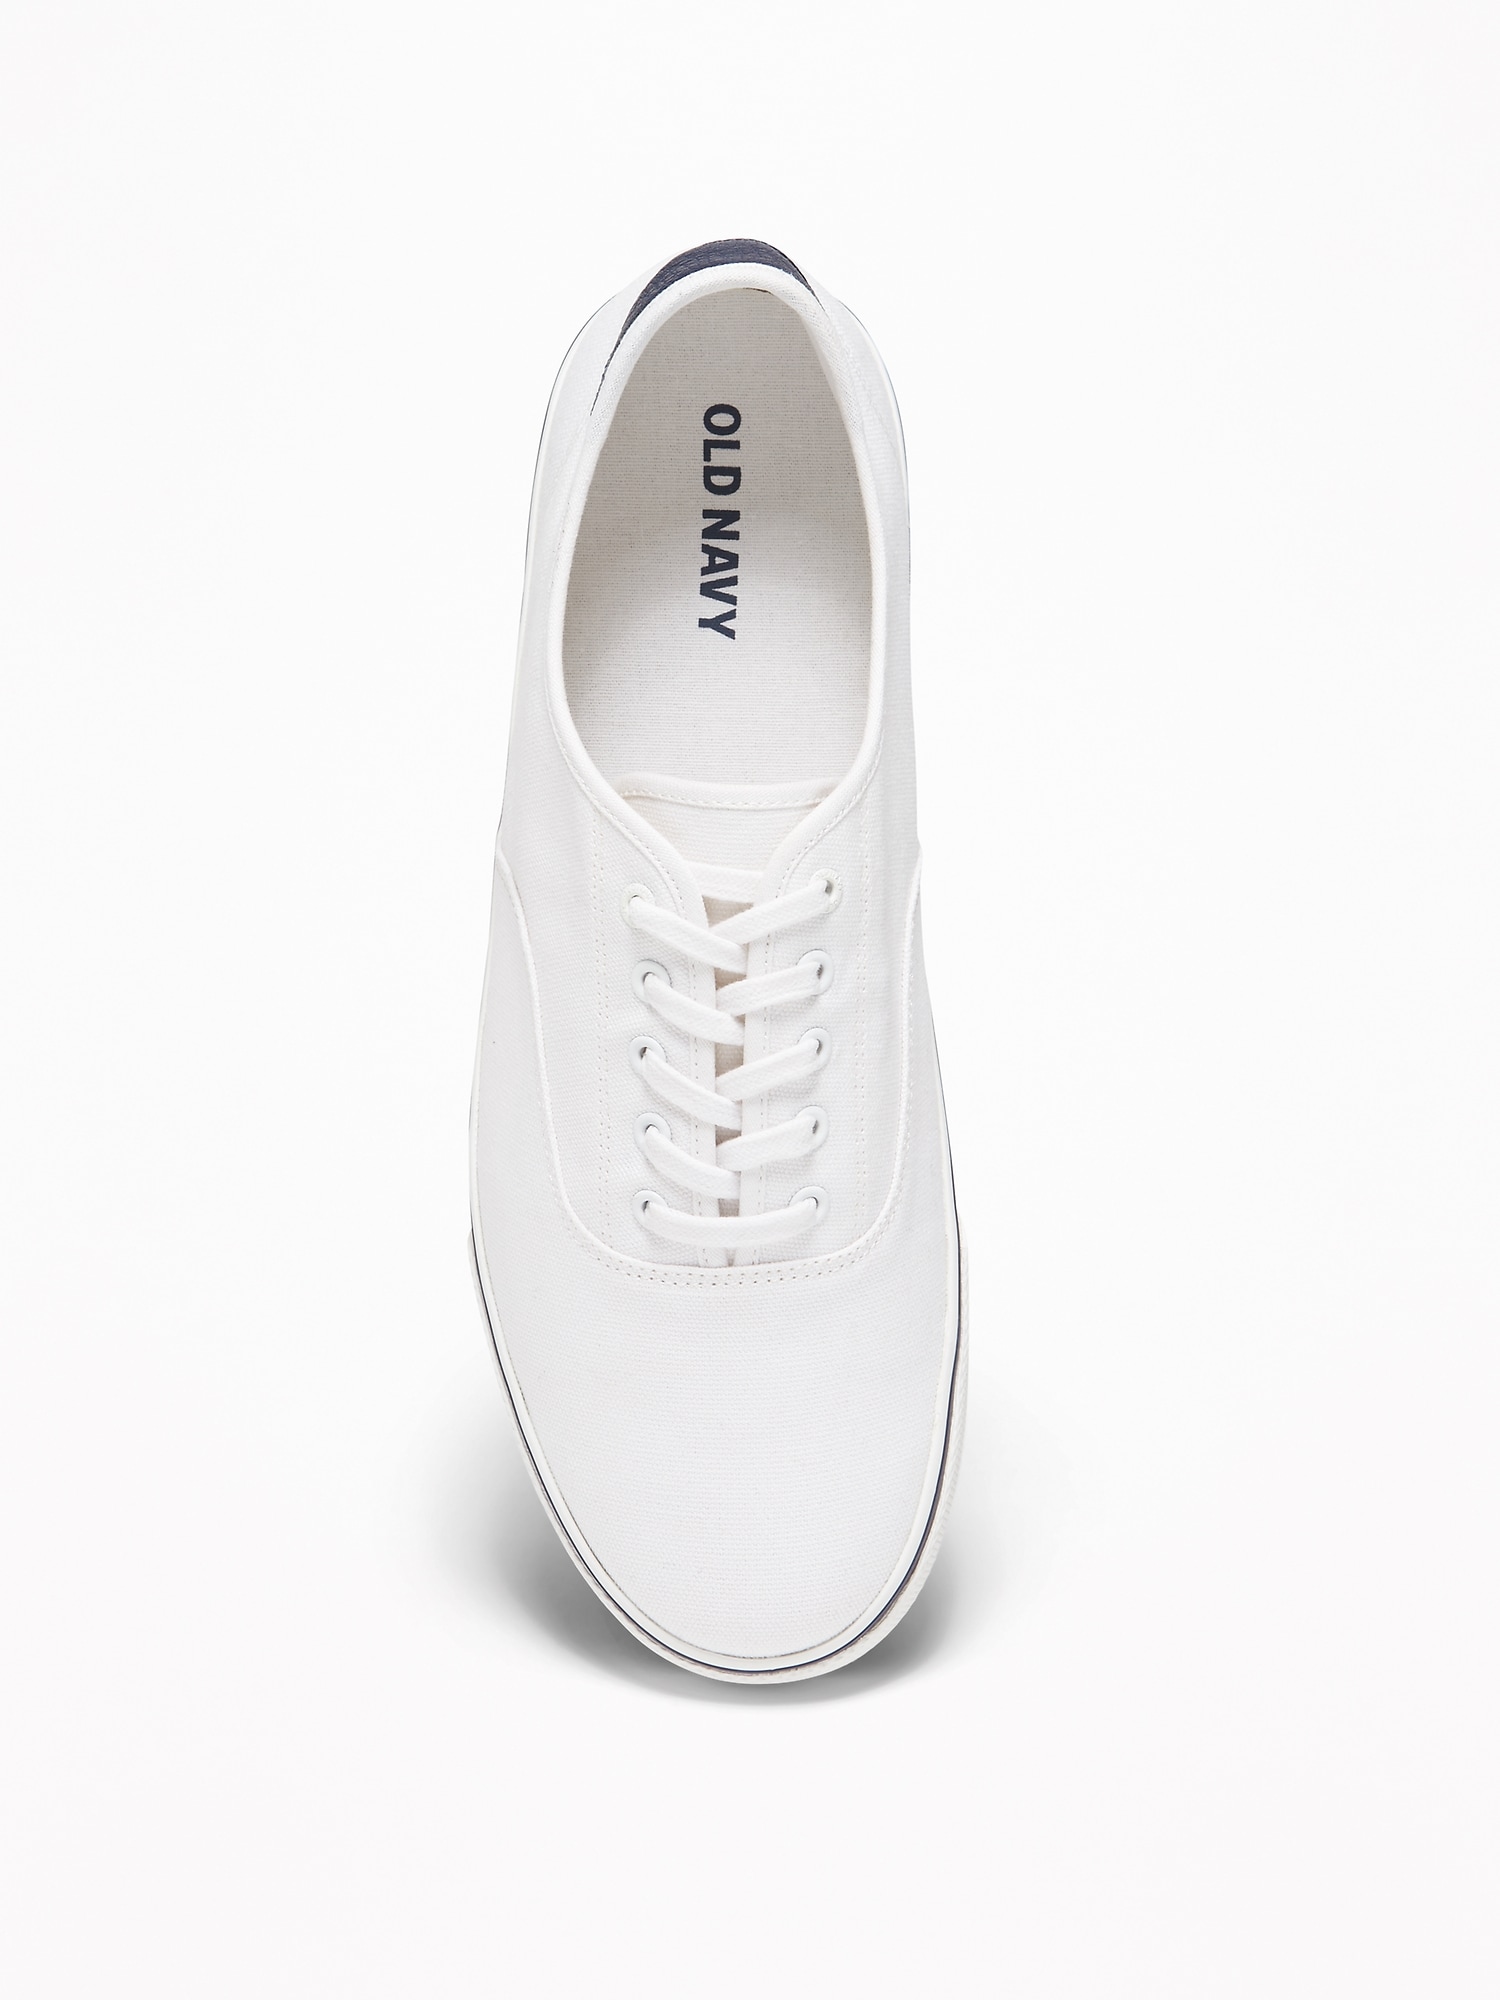 Lace-Up Sneakers for Men | Old Navy